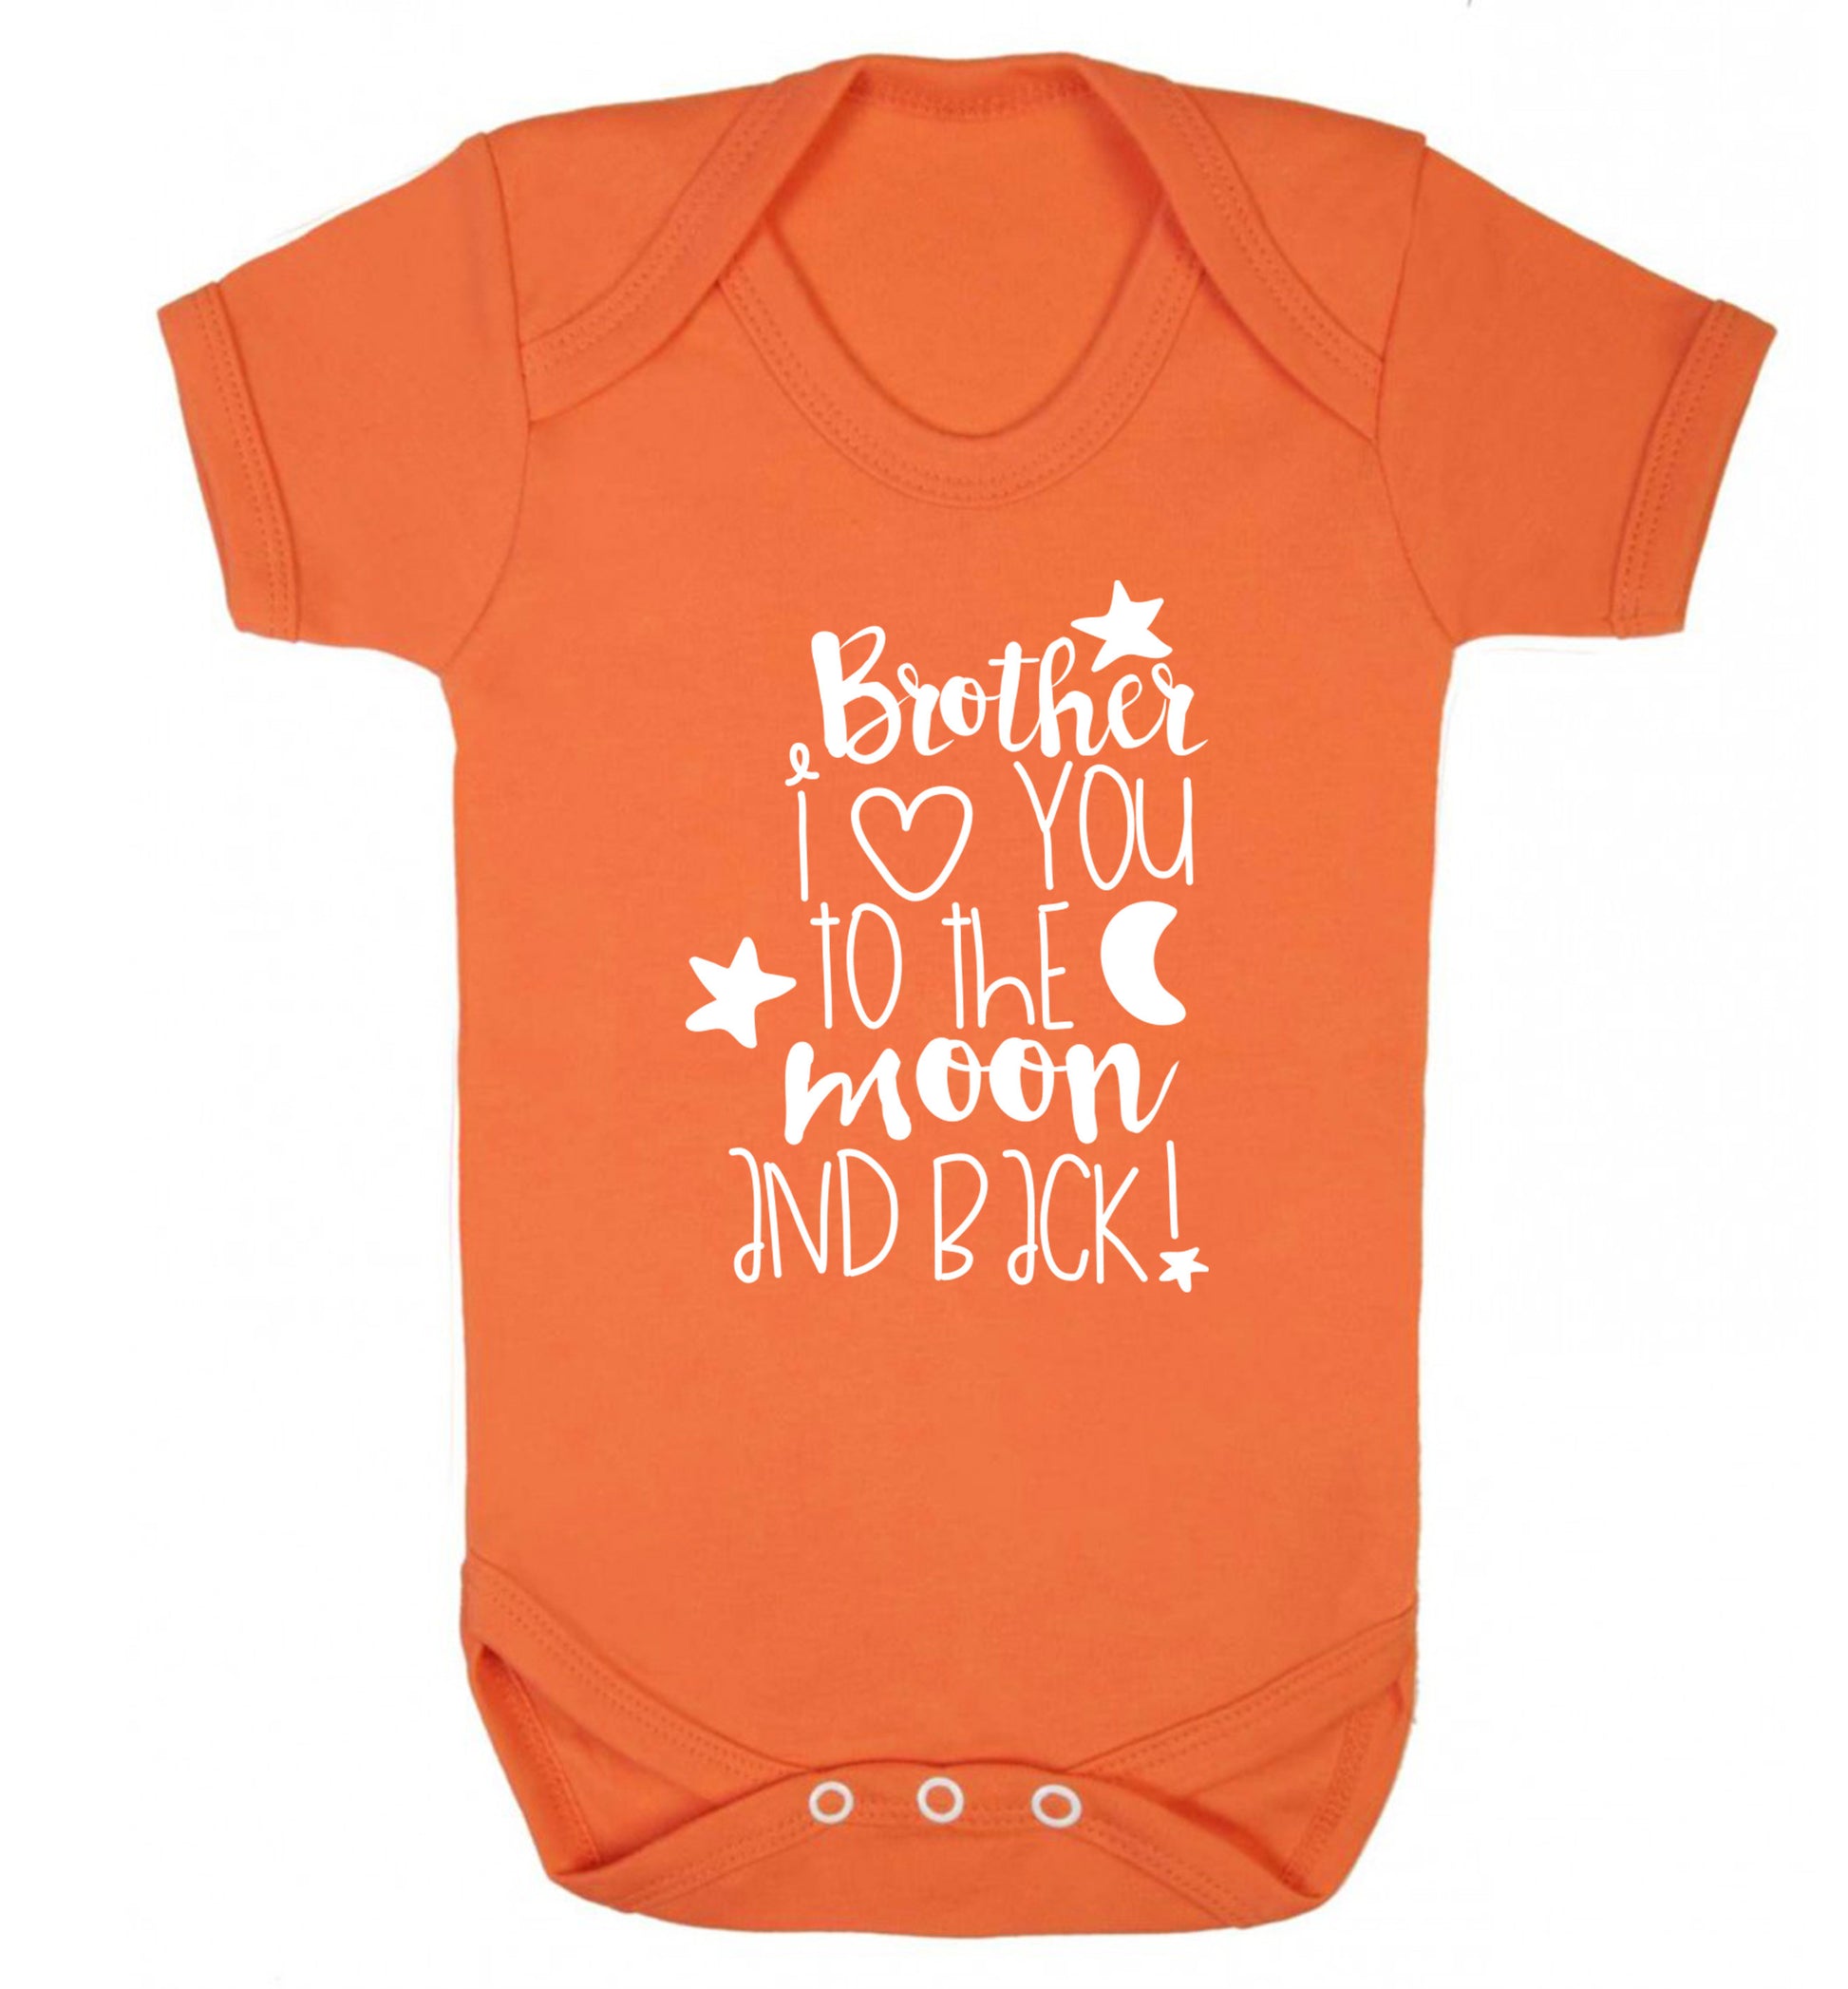 Brother I love you to the moon and back Baby Vest orange 18-24 months